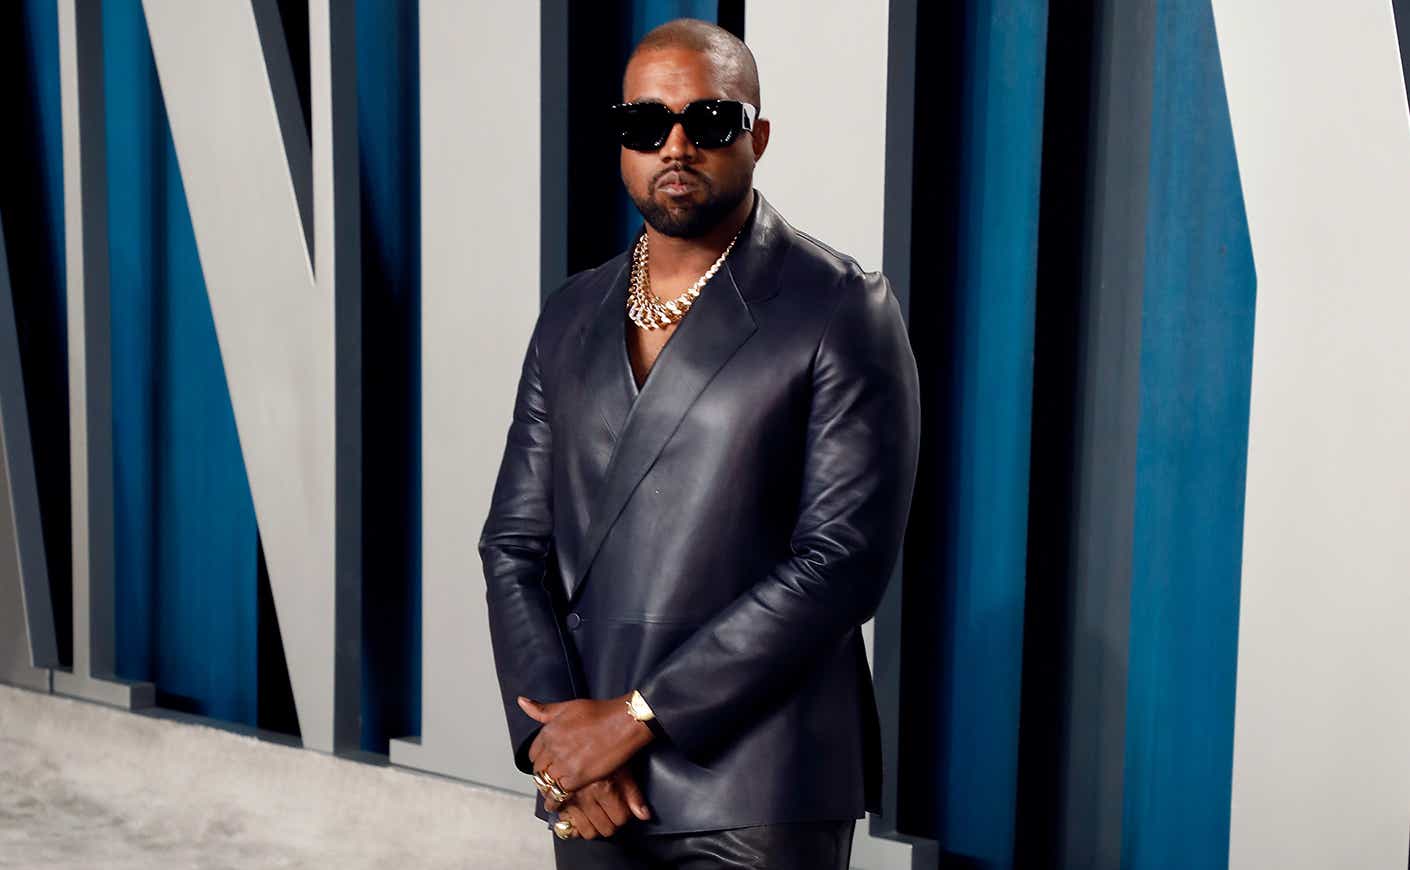 Kanye West stands at attention at the Vanity Fair afterparty for the Oscars